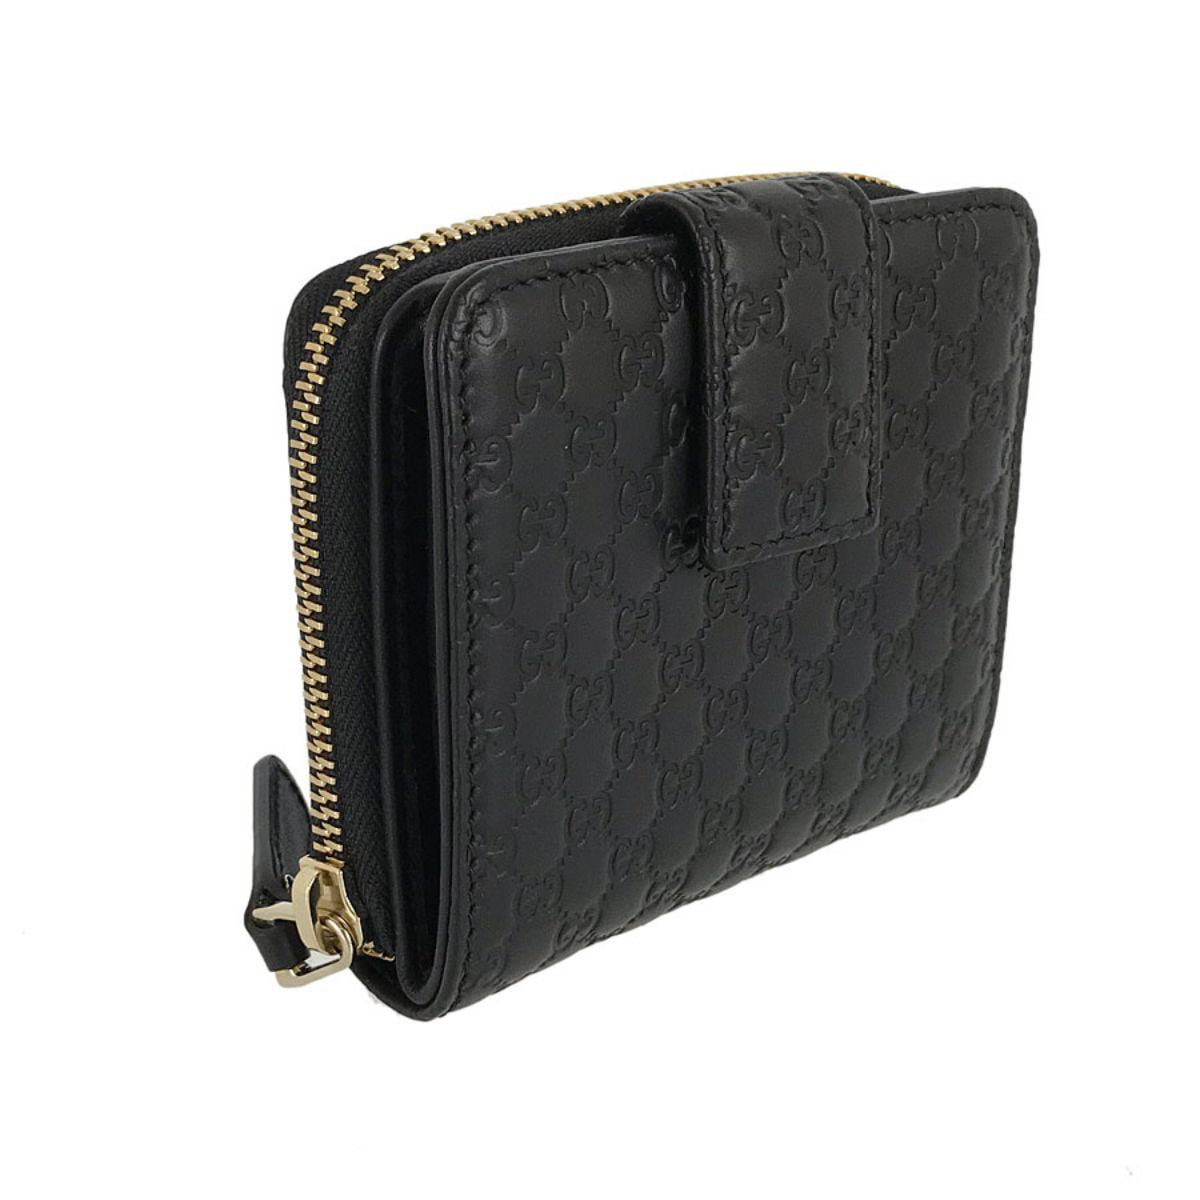 Gucci Micro GG ssima Leather Small Bifold Wallet 449395 Black - Wallets, Free Worldwide Shipping